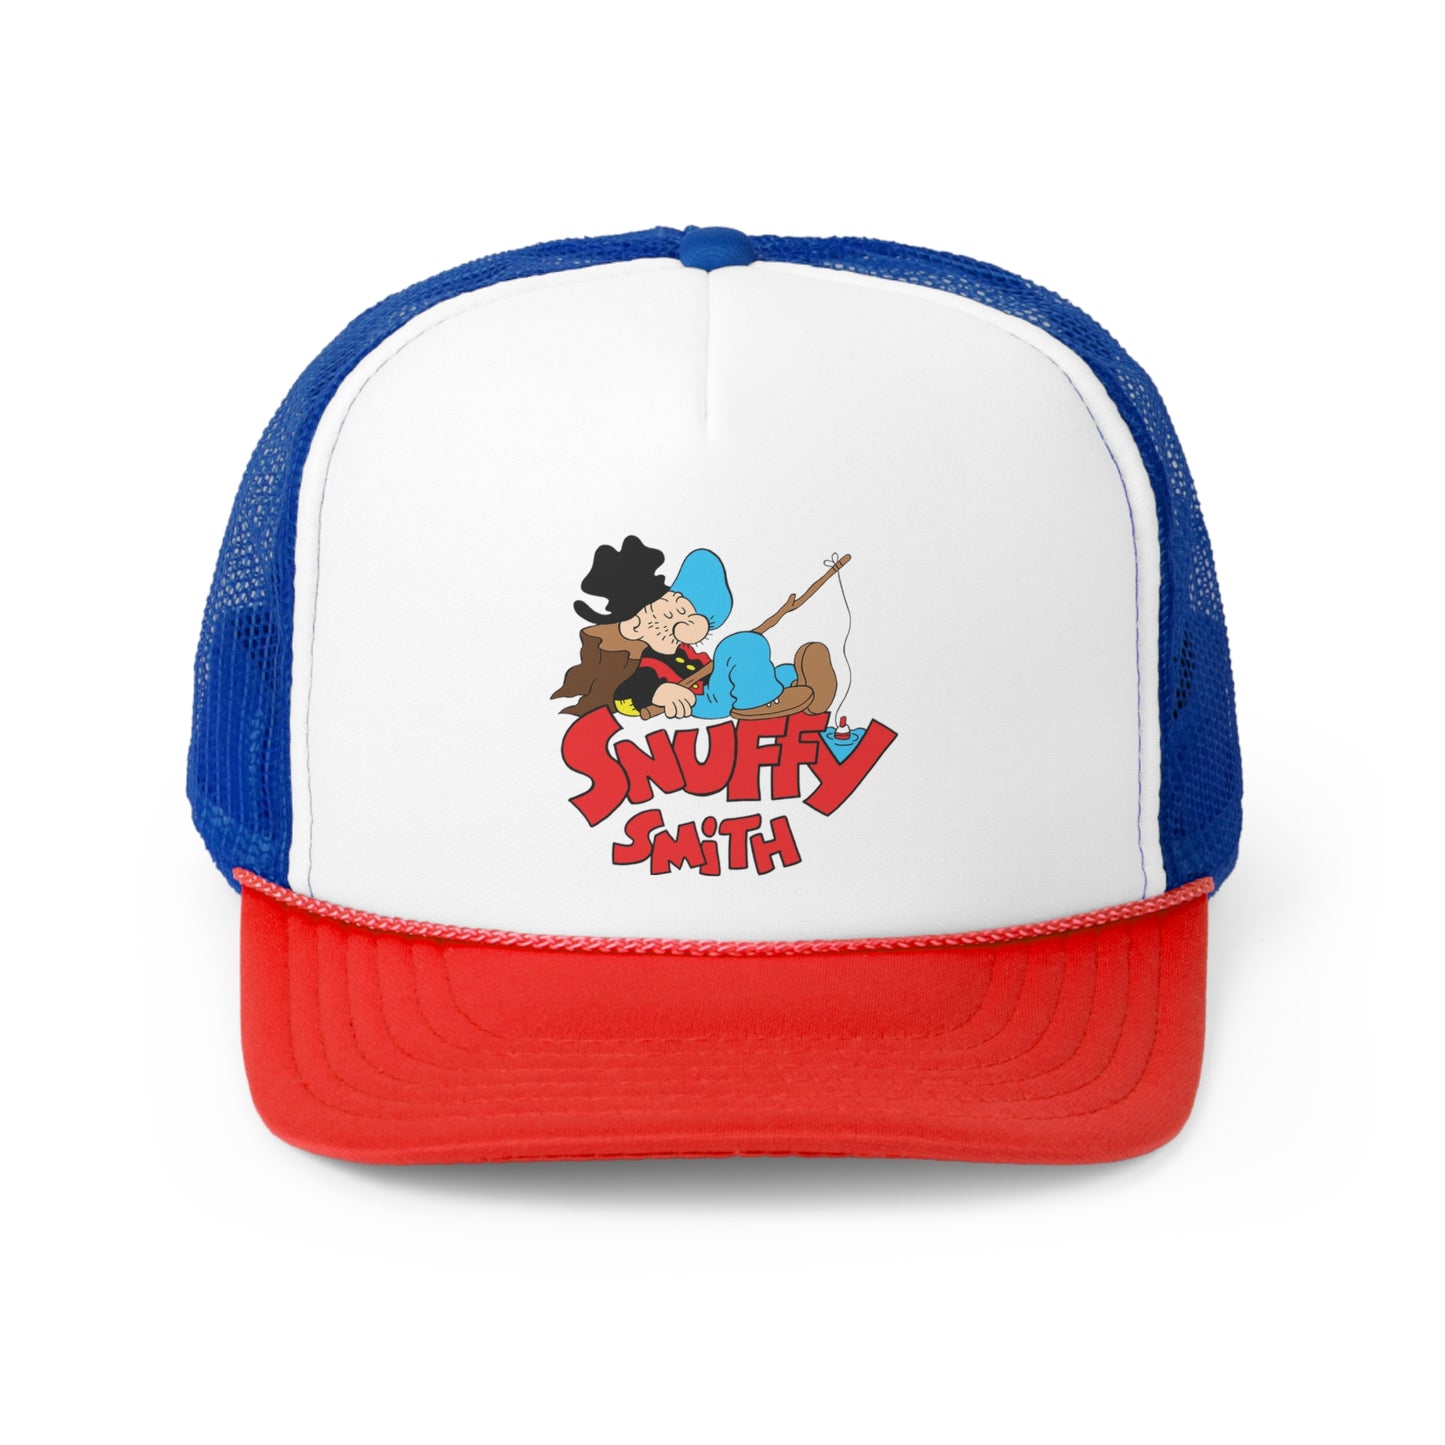 Snuffy Smith Bodacious Red White & Blue Trucker